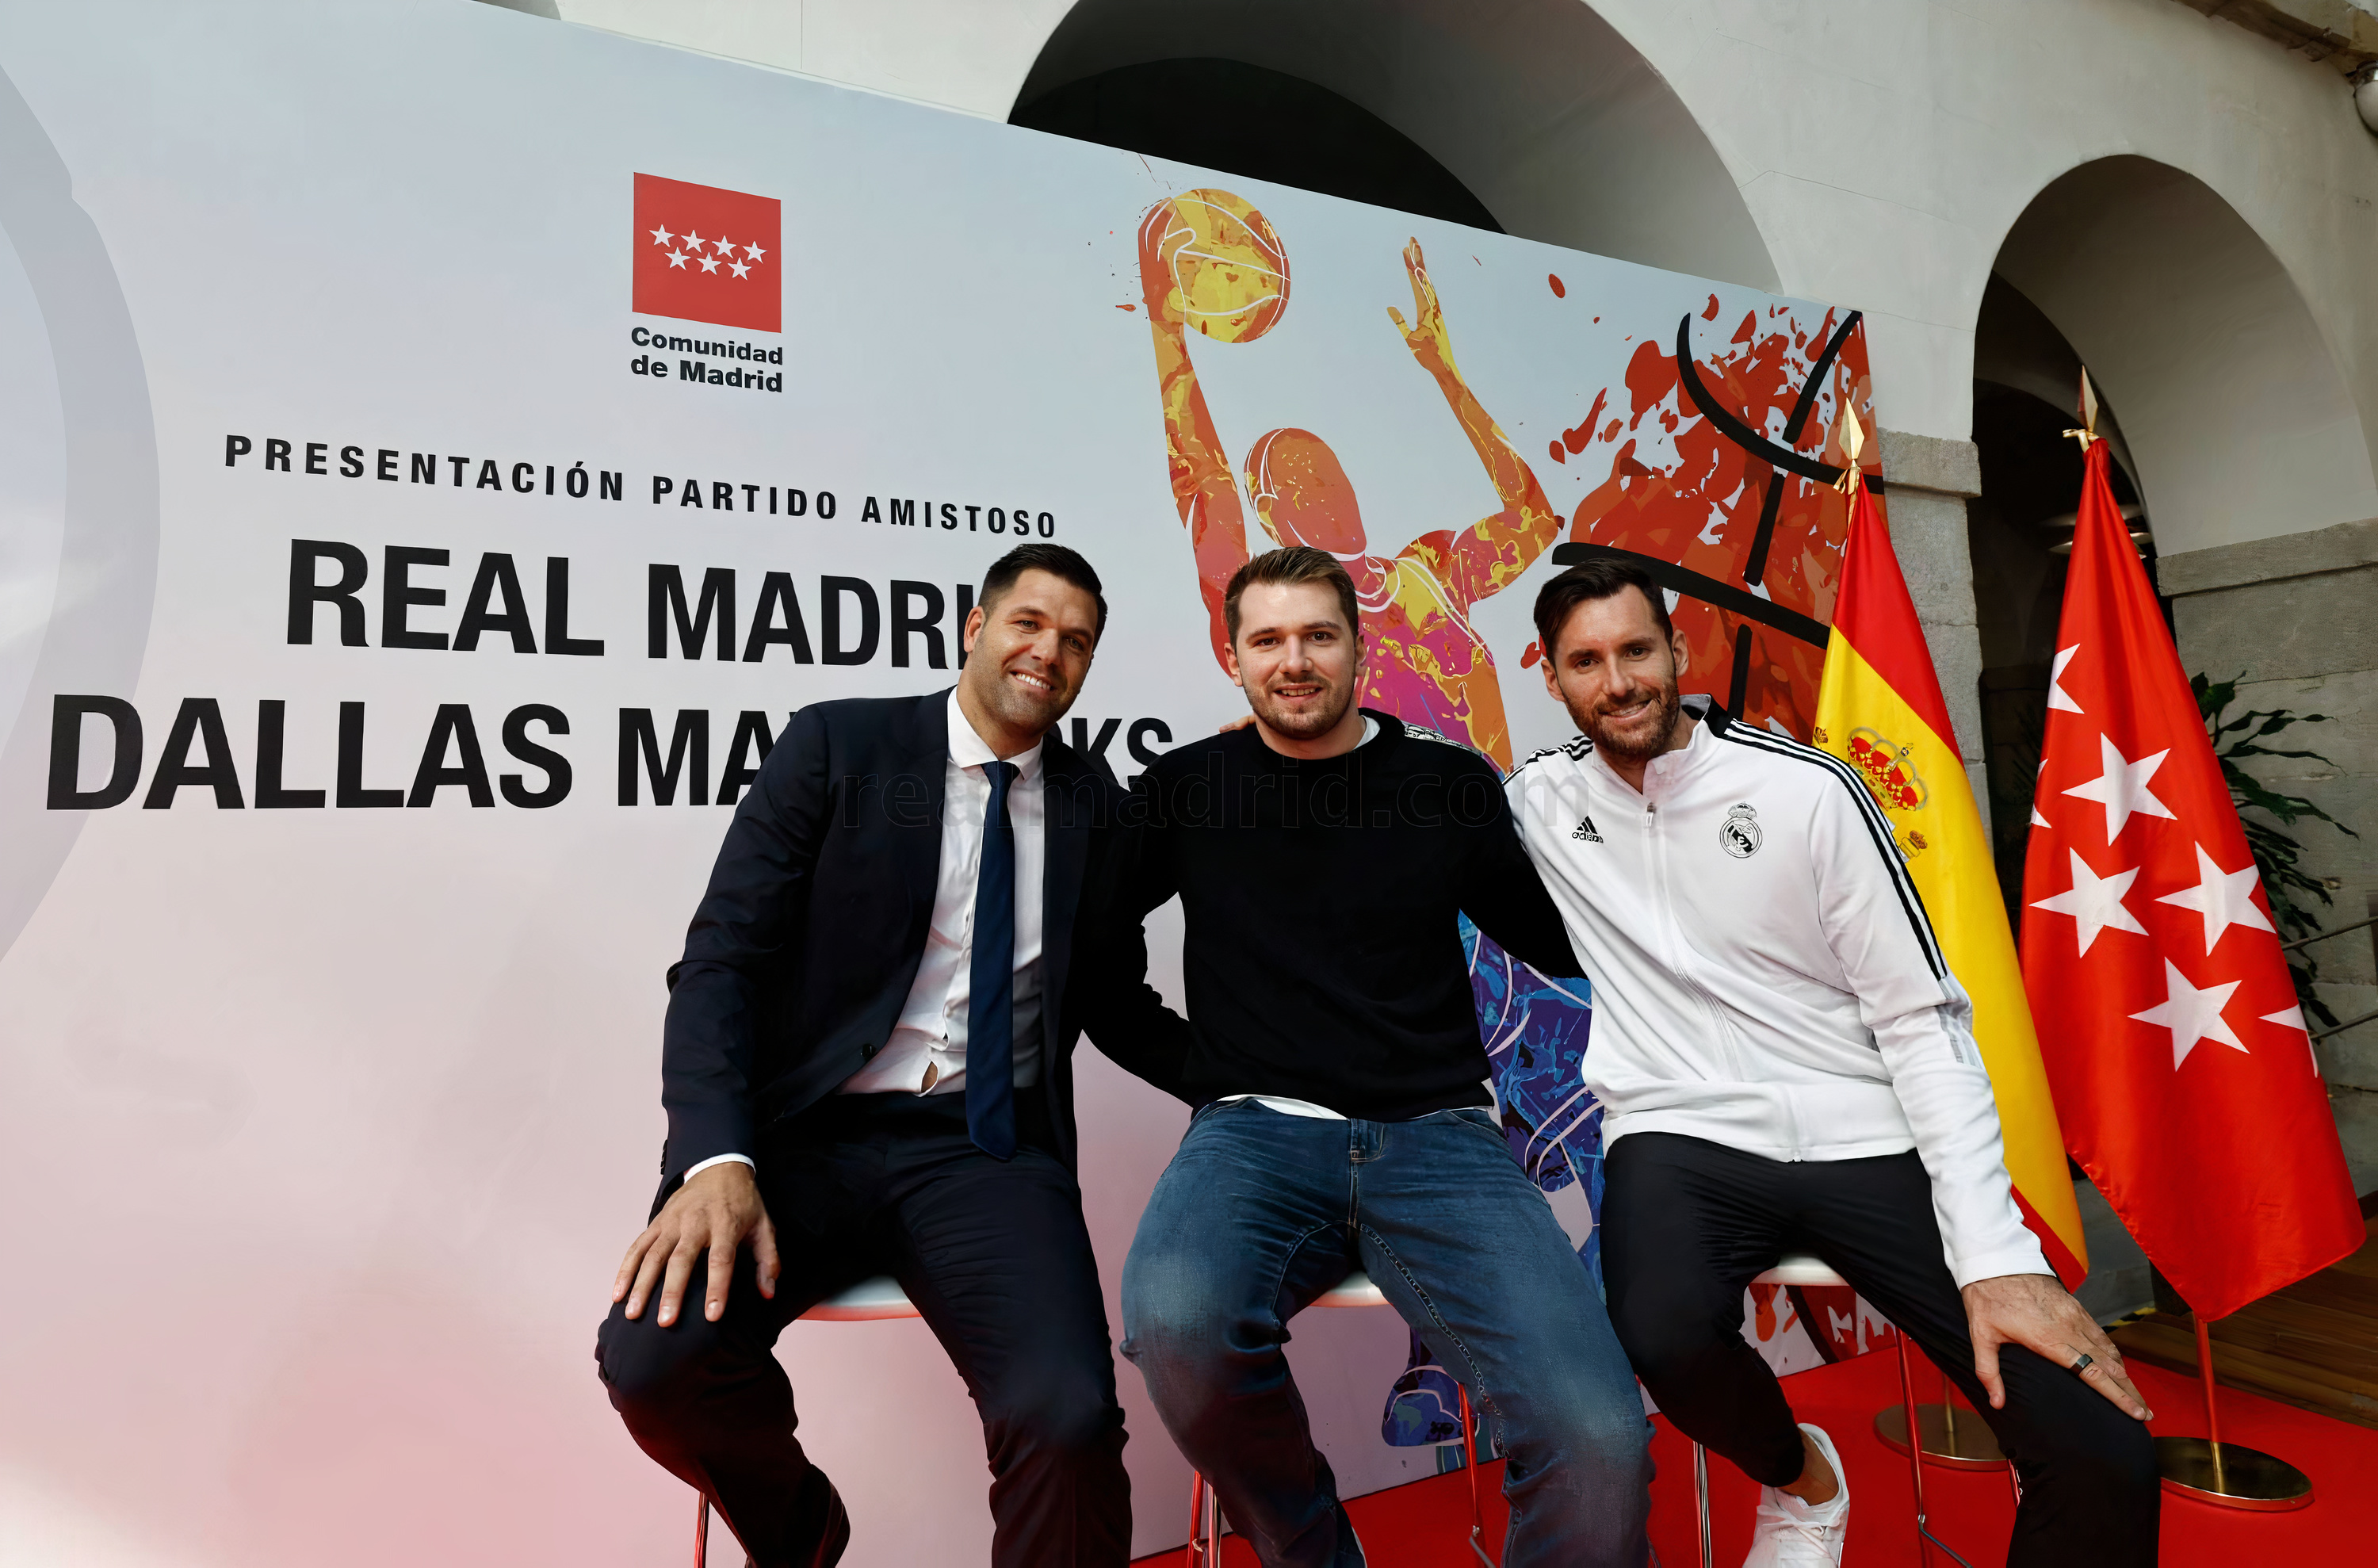 VIDEO: Doncic’s day in Madrid